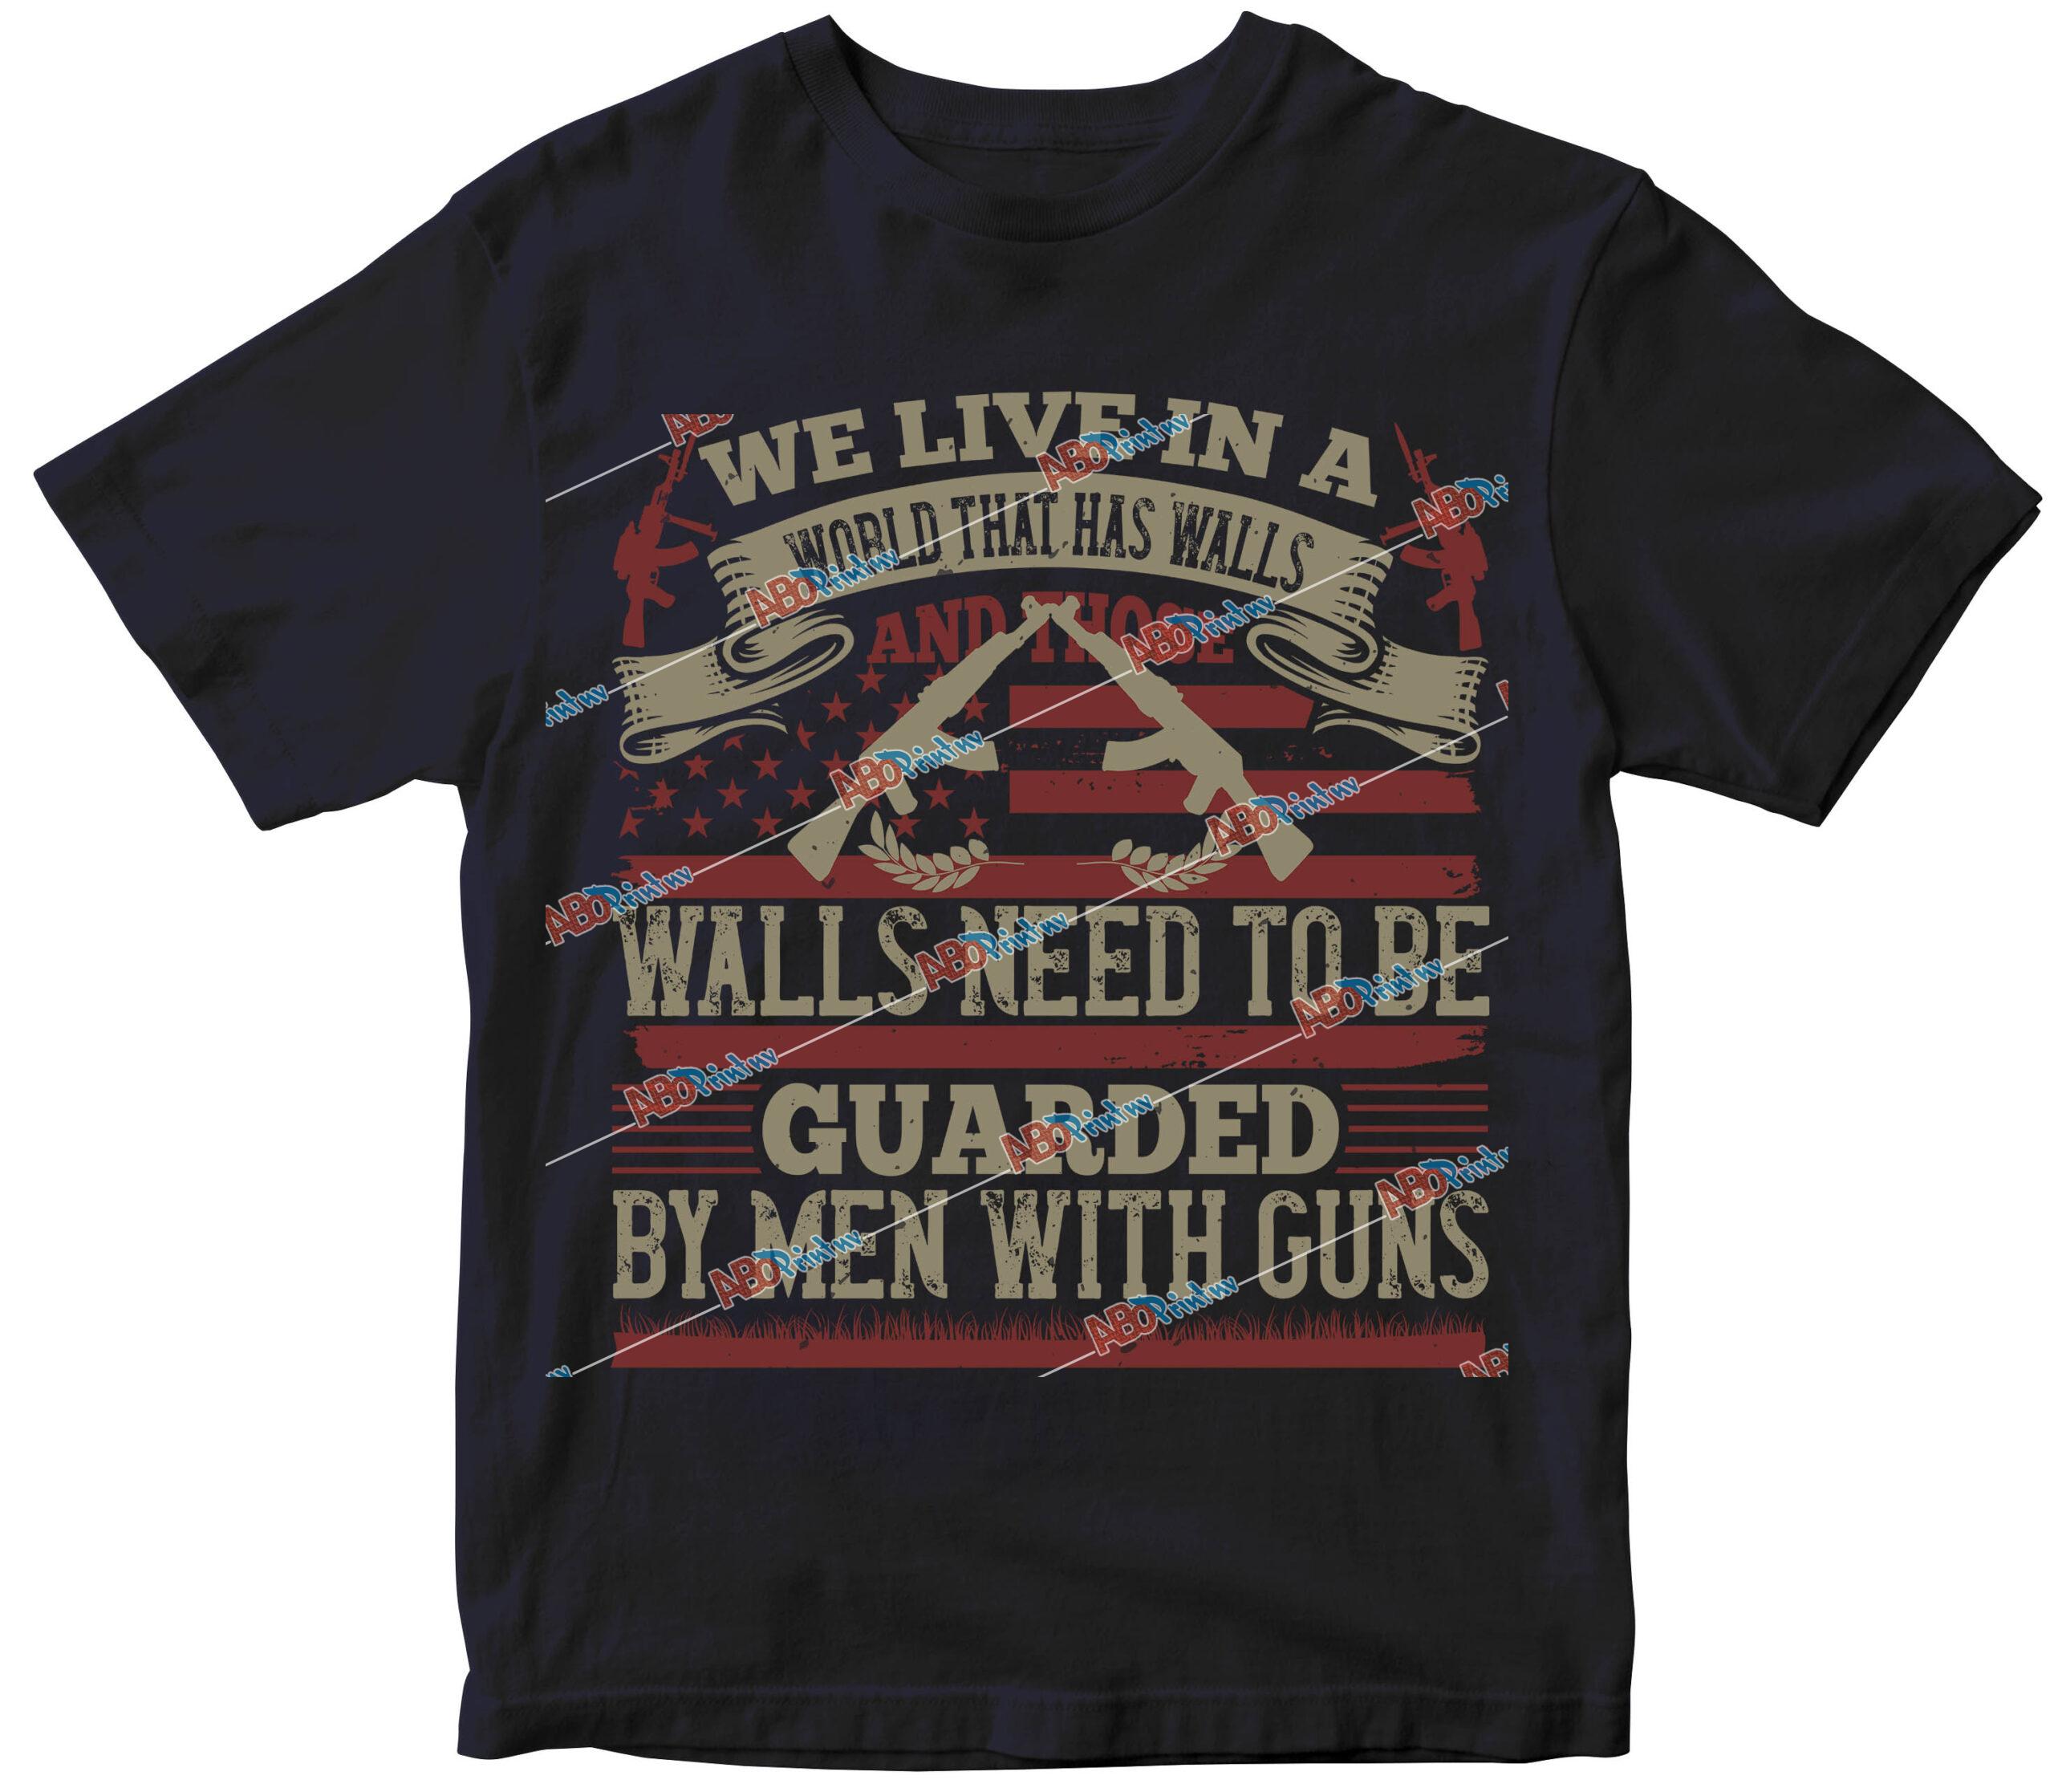 We live in a world that has walls, and those walls need to be guarded by men with guns.jpg